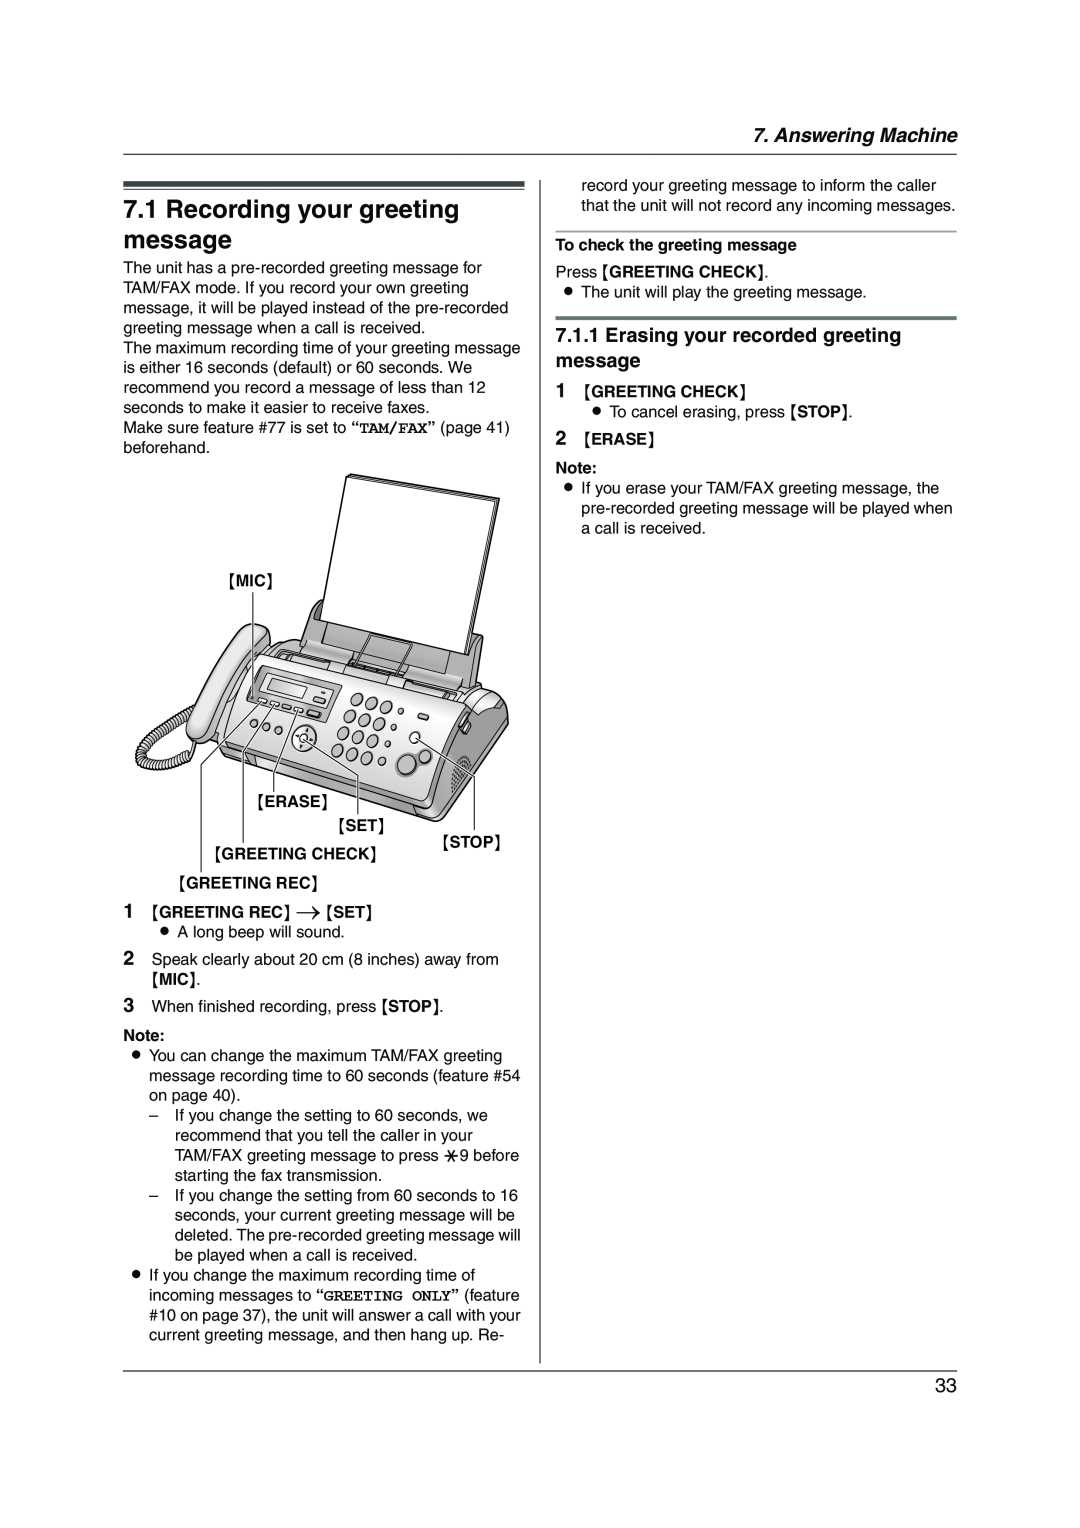 Panasonic KX-FP215 Recording your greeting message, Answering Machine, Erasing your recorded greeting message 